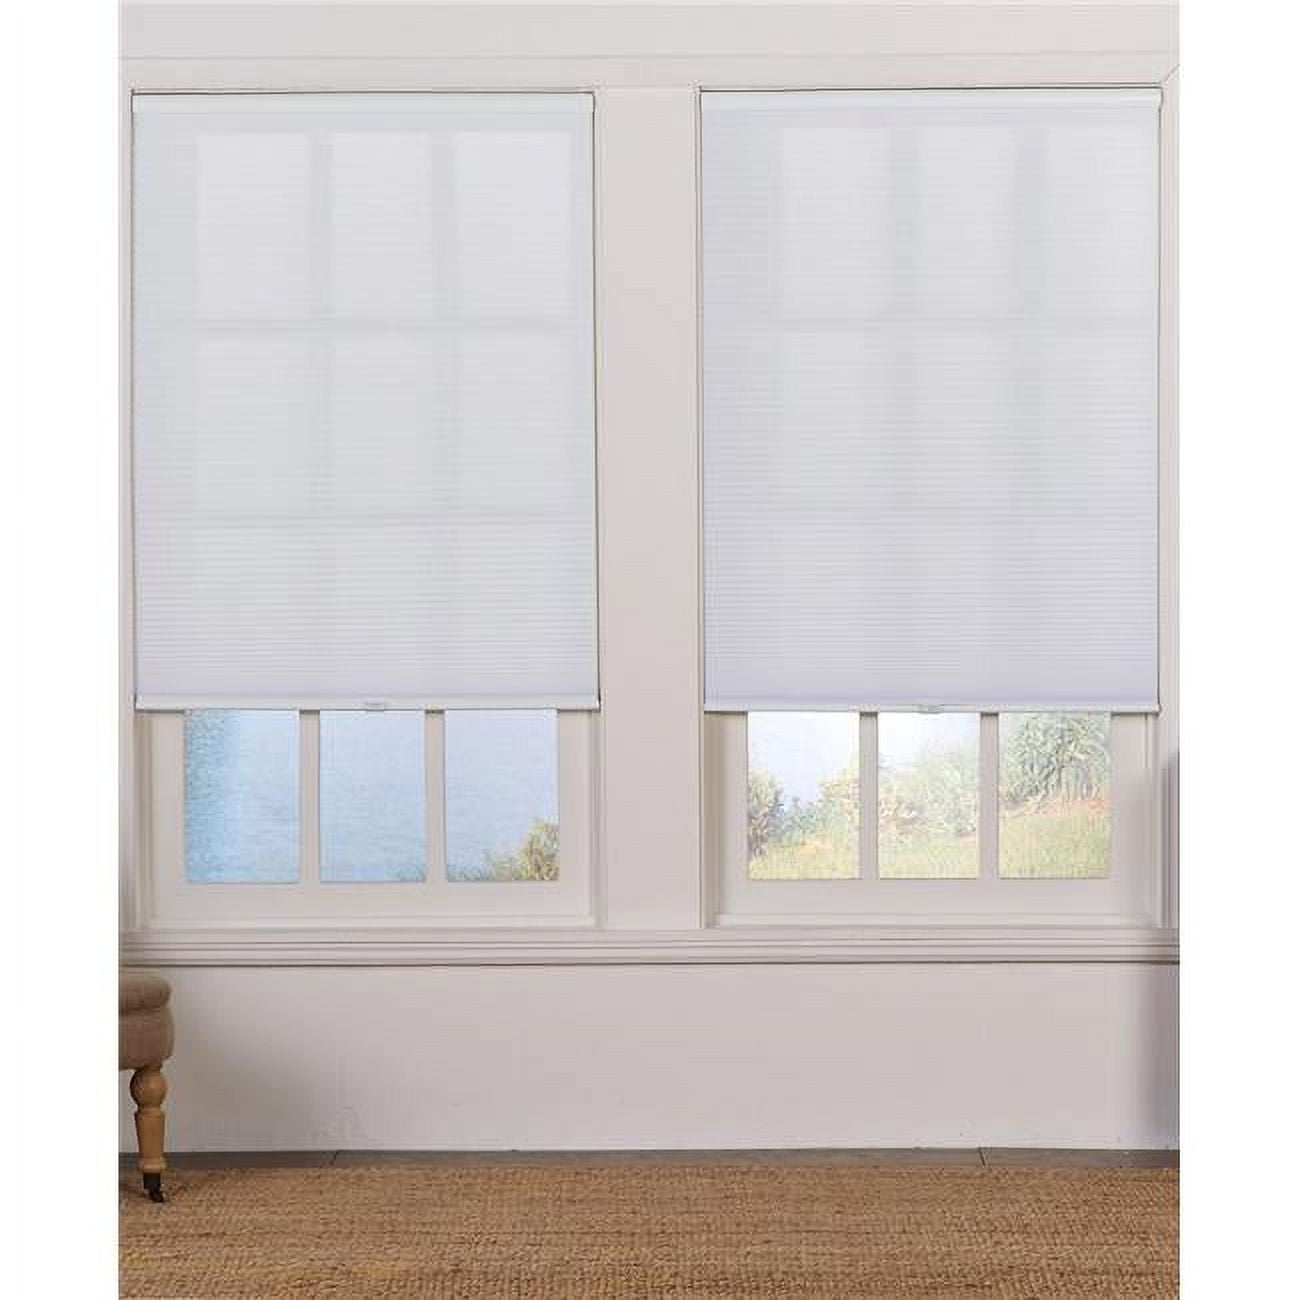 Ubc205x64wt Cordless Light Filtering Cellular Shade, White - 20.5 X 64 In.